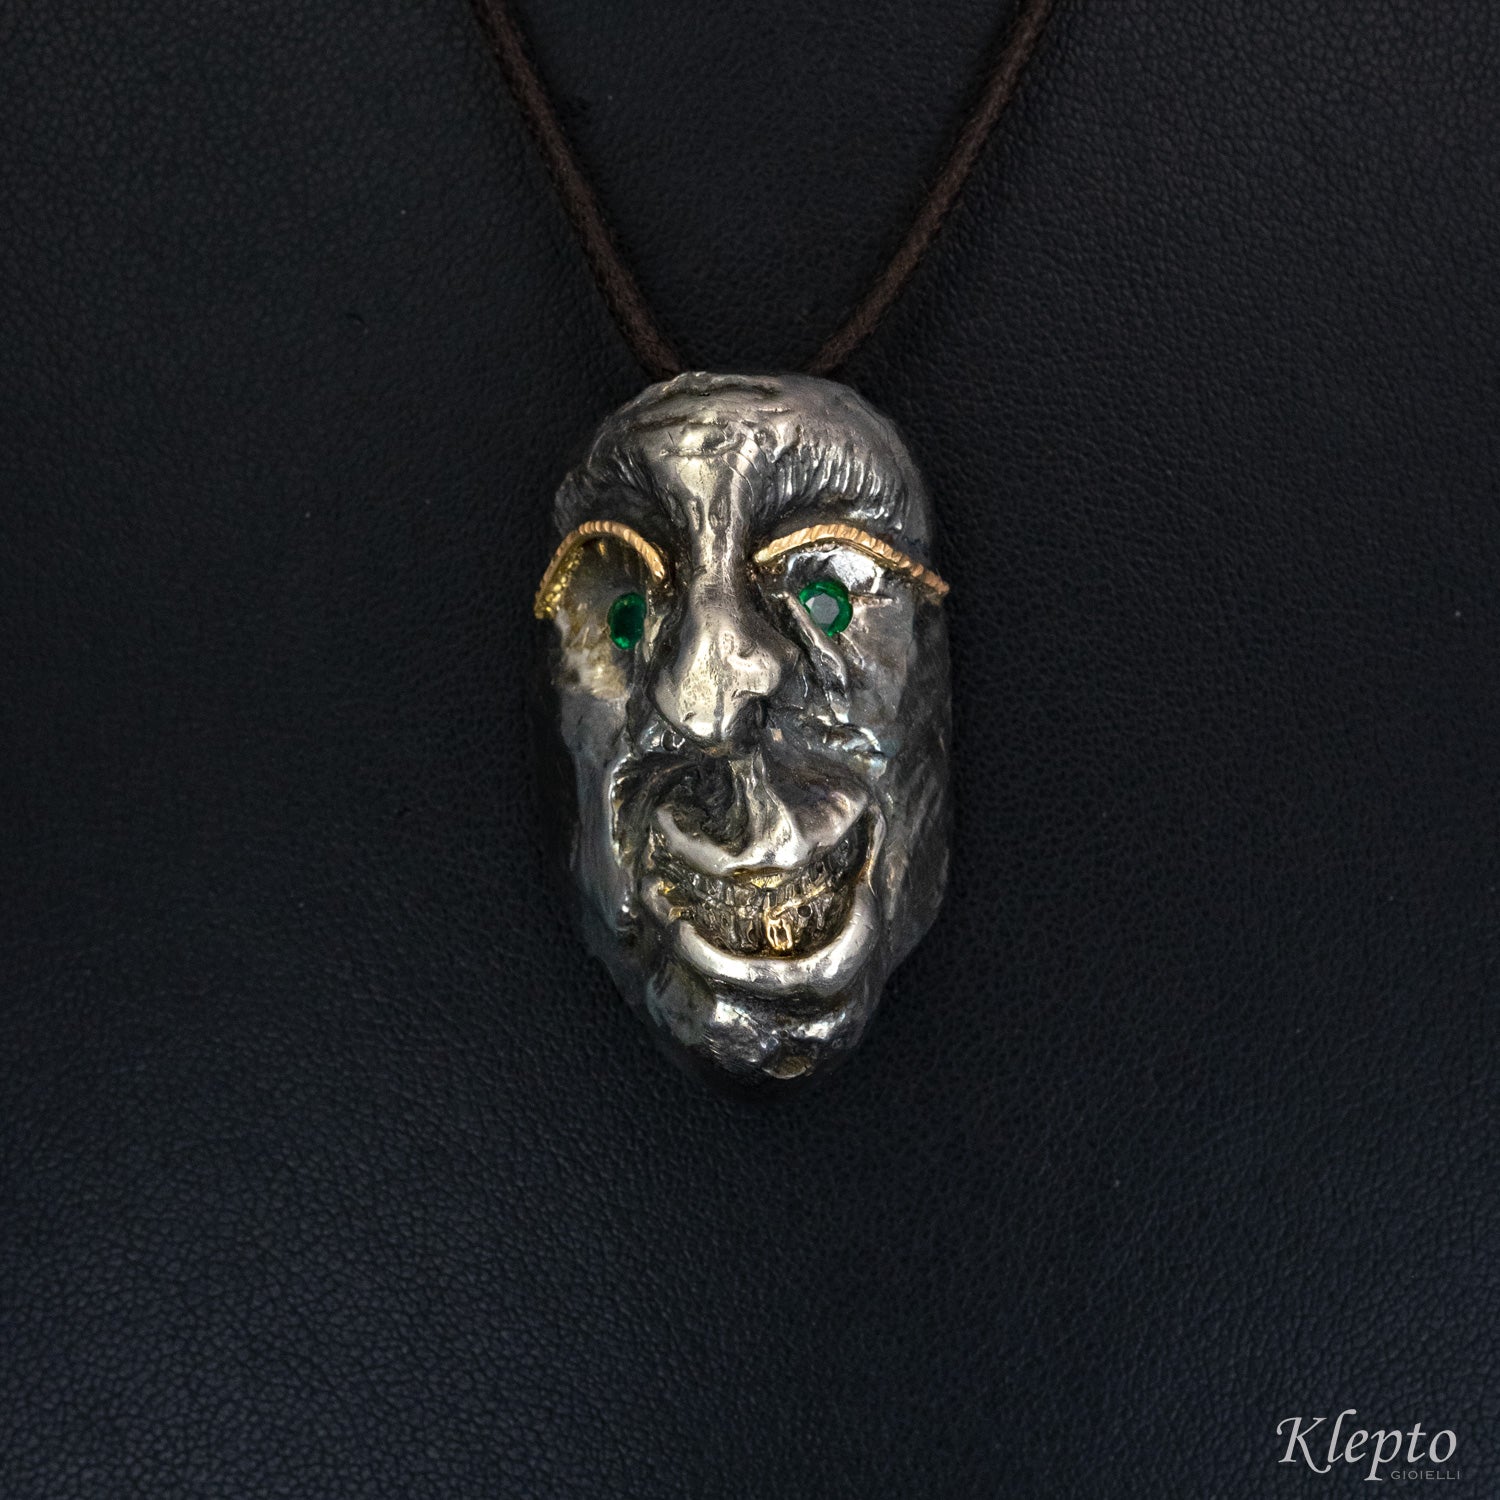 Silnova® Silver Pendant "Pirate Jack" with rose gold and Emerald details